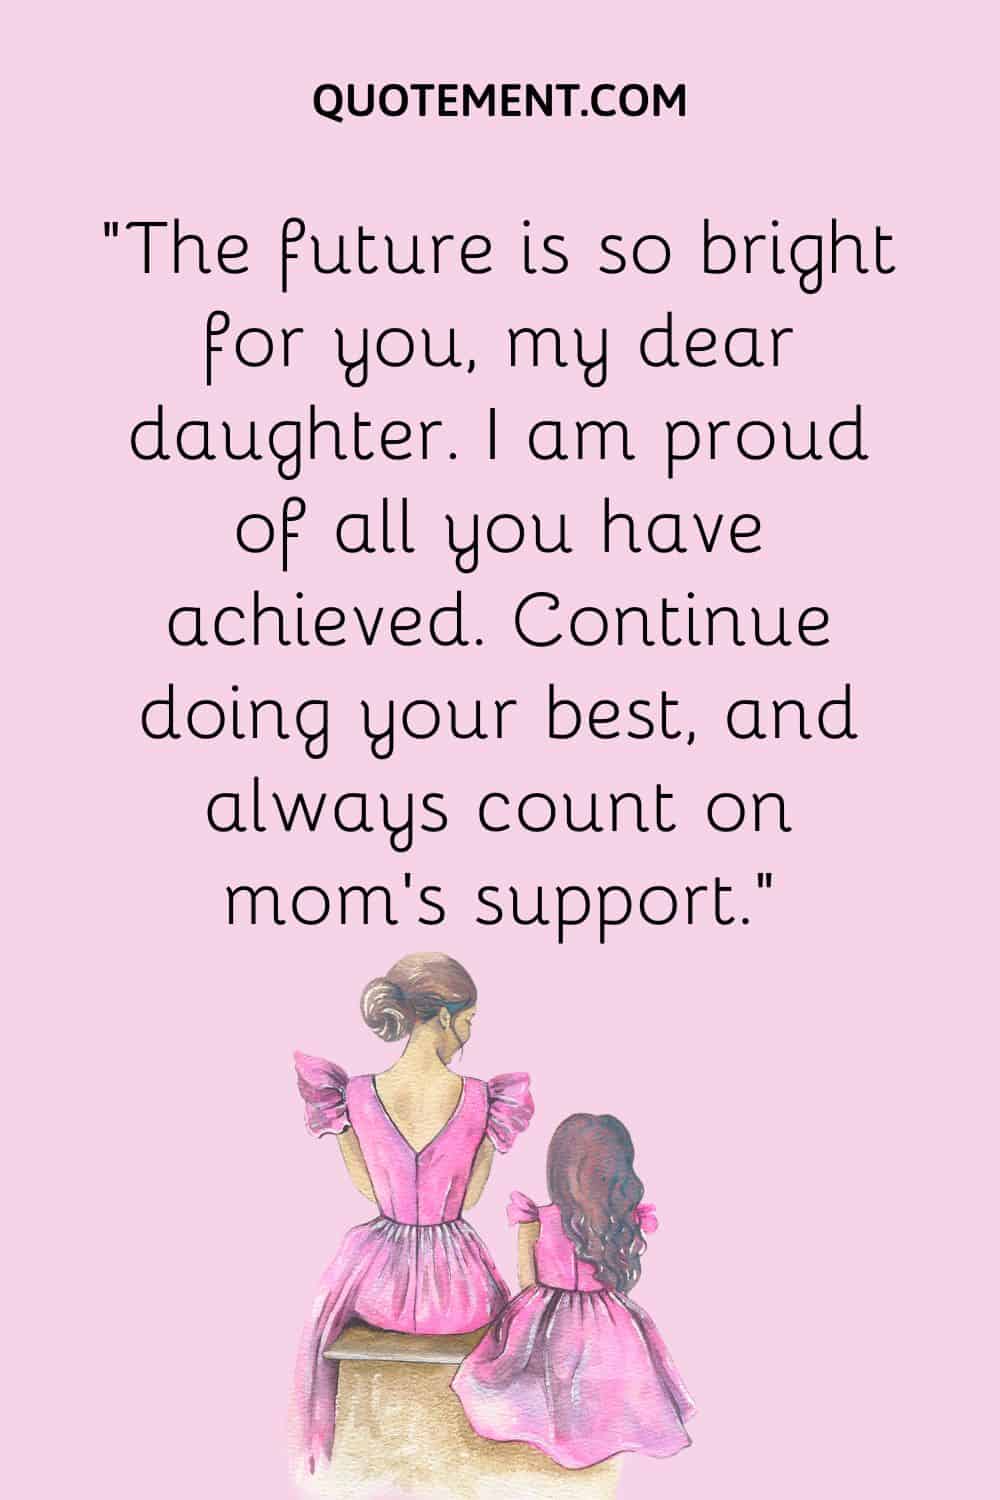 “The future is so bright for you, my dear daughter. I am proud of all you have achieved. Continue doing your best, and always count on mom’s support.”